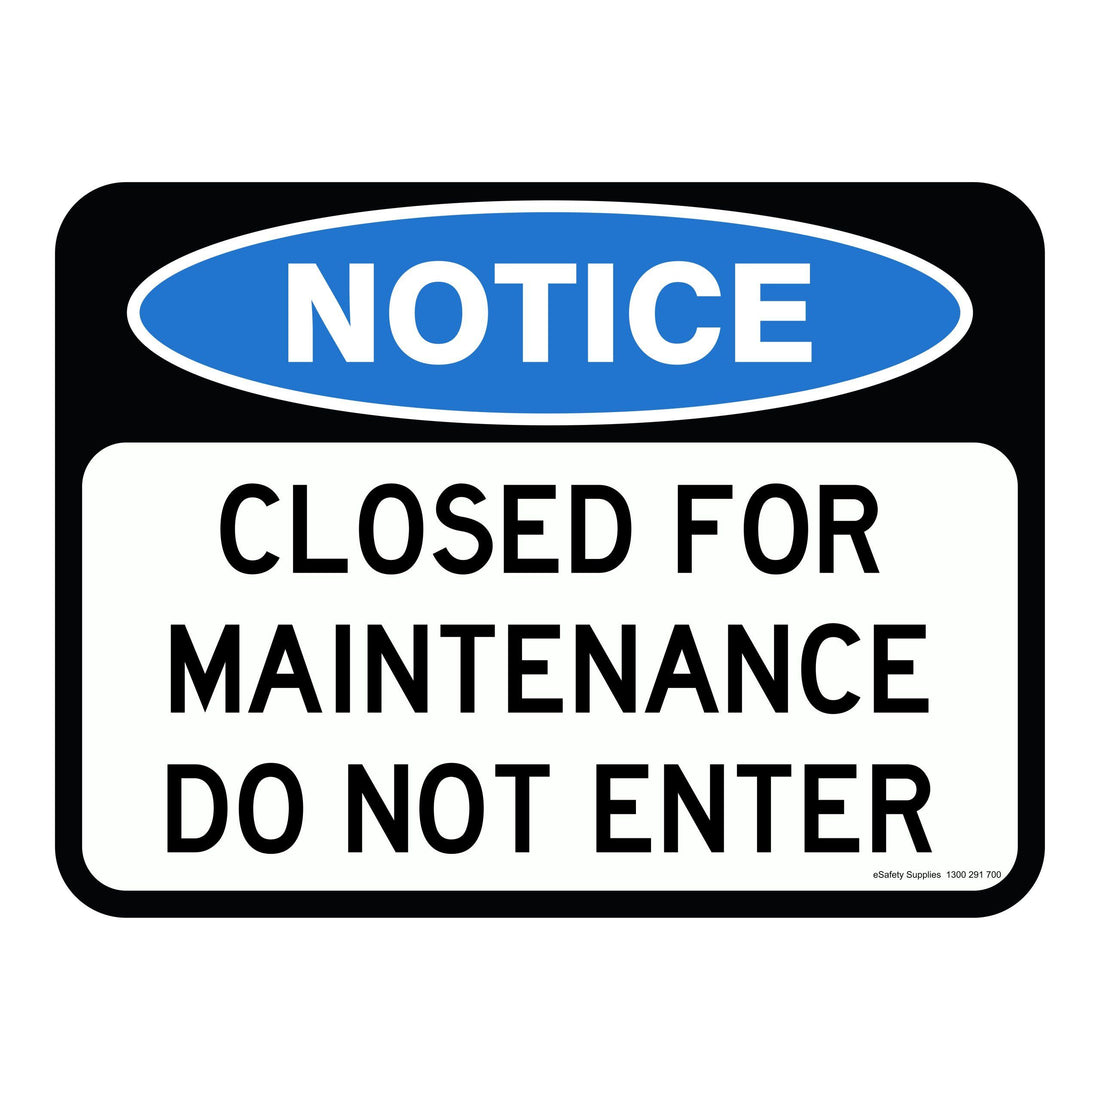 NOTICE - CLOSED FOR MAINTENANCE DO NOT ENTER